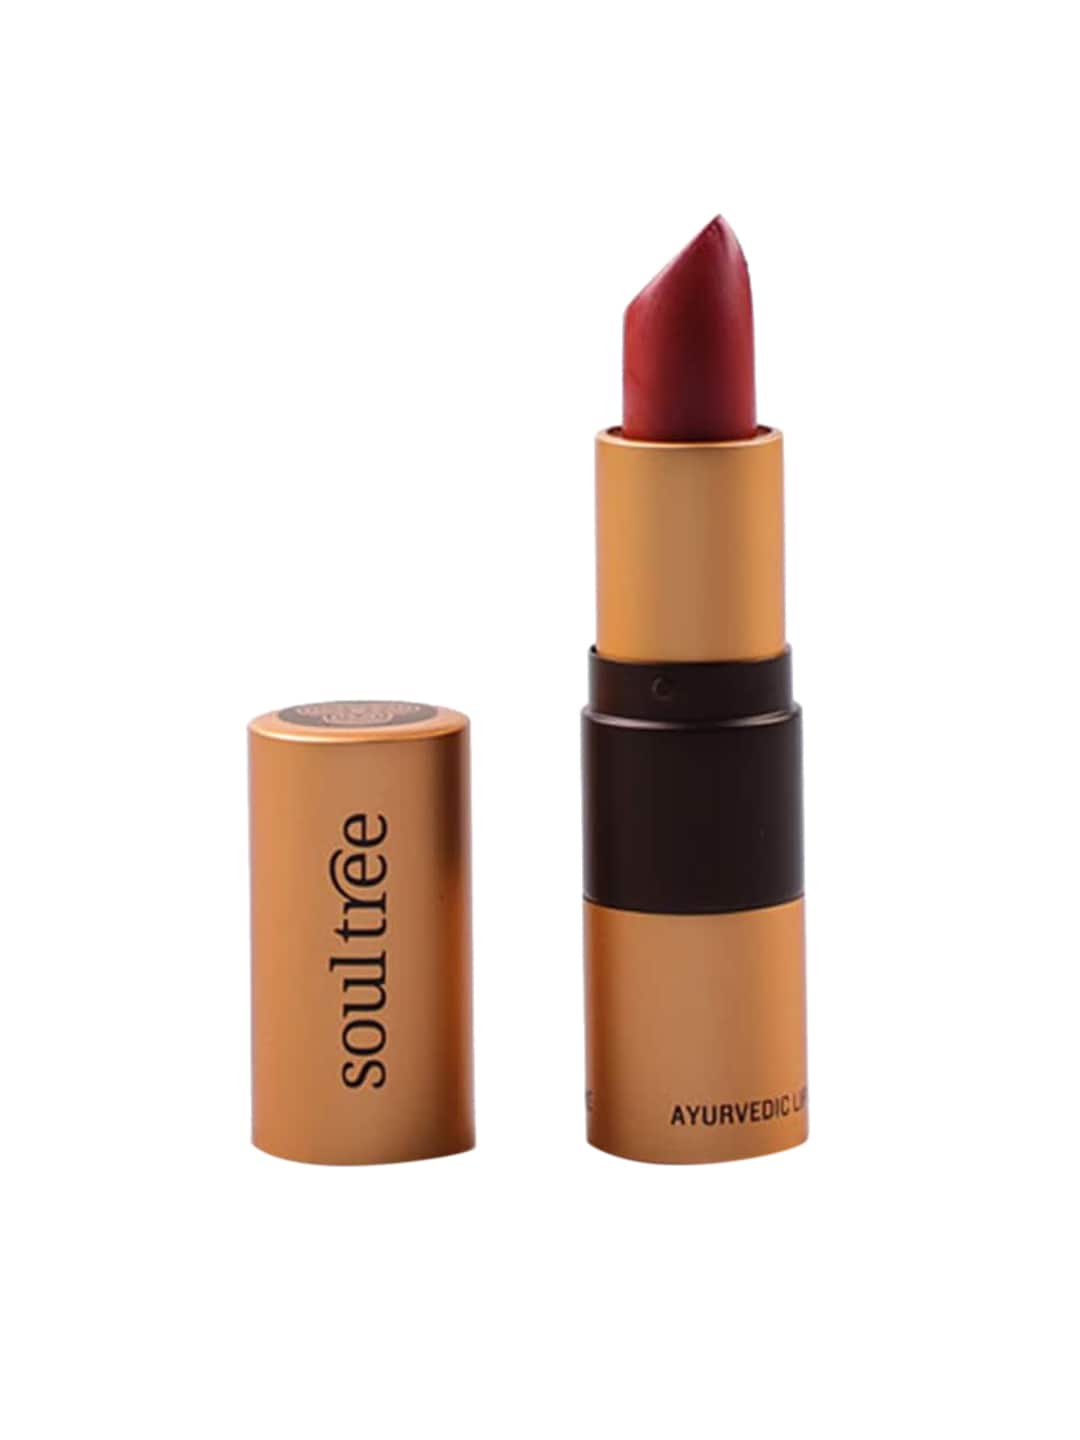 Soultree Ayurvedic Lipstick - Coral Pink 904 - 4gm Price in India